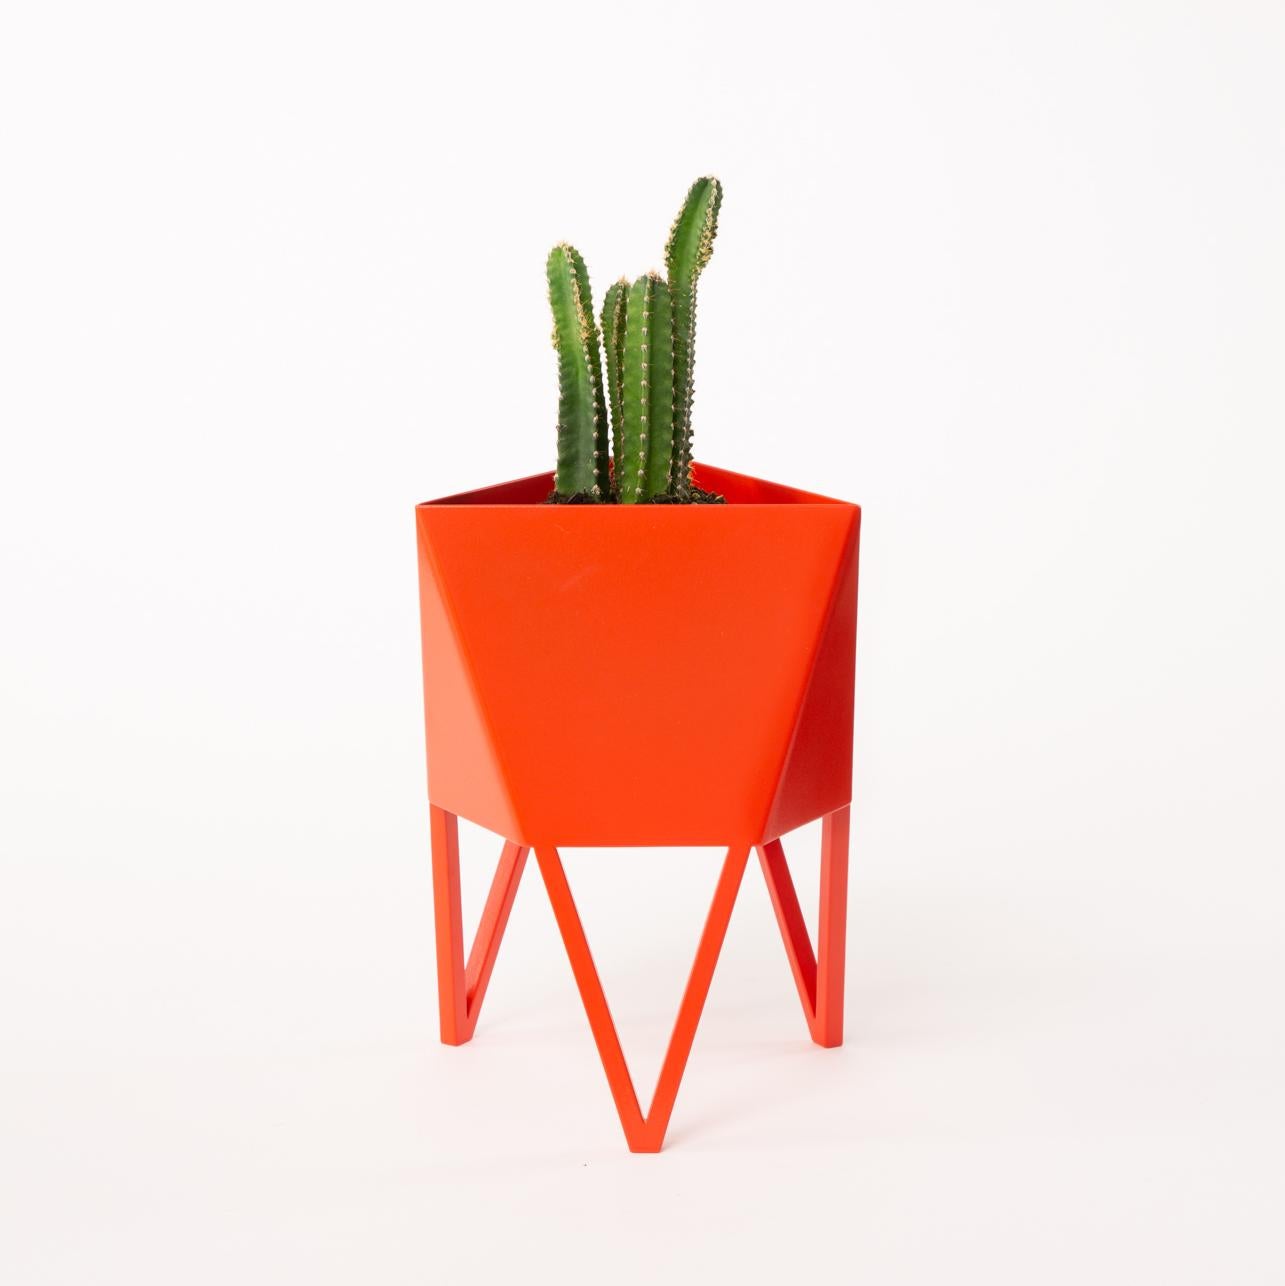 Faceted Deca Planter in Mars By Force/Collide, Size Large, 2023 For Sale